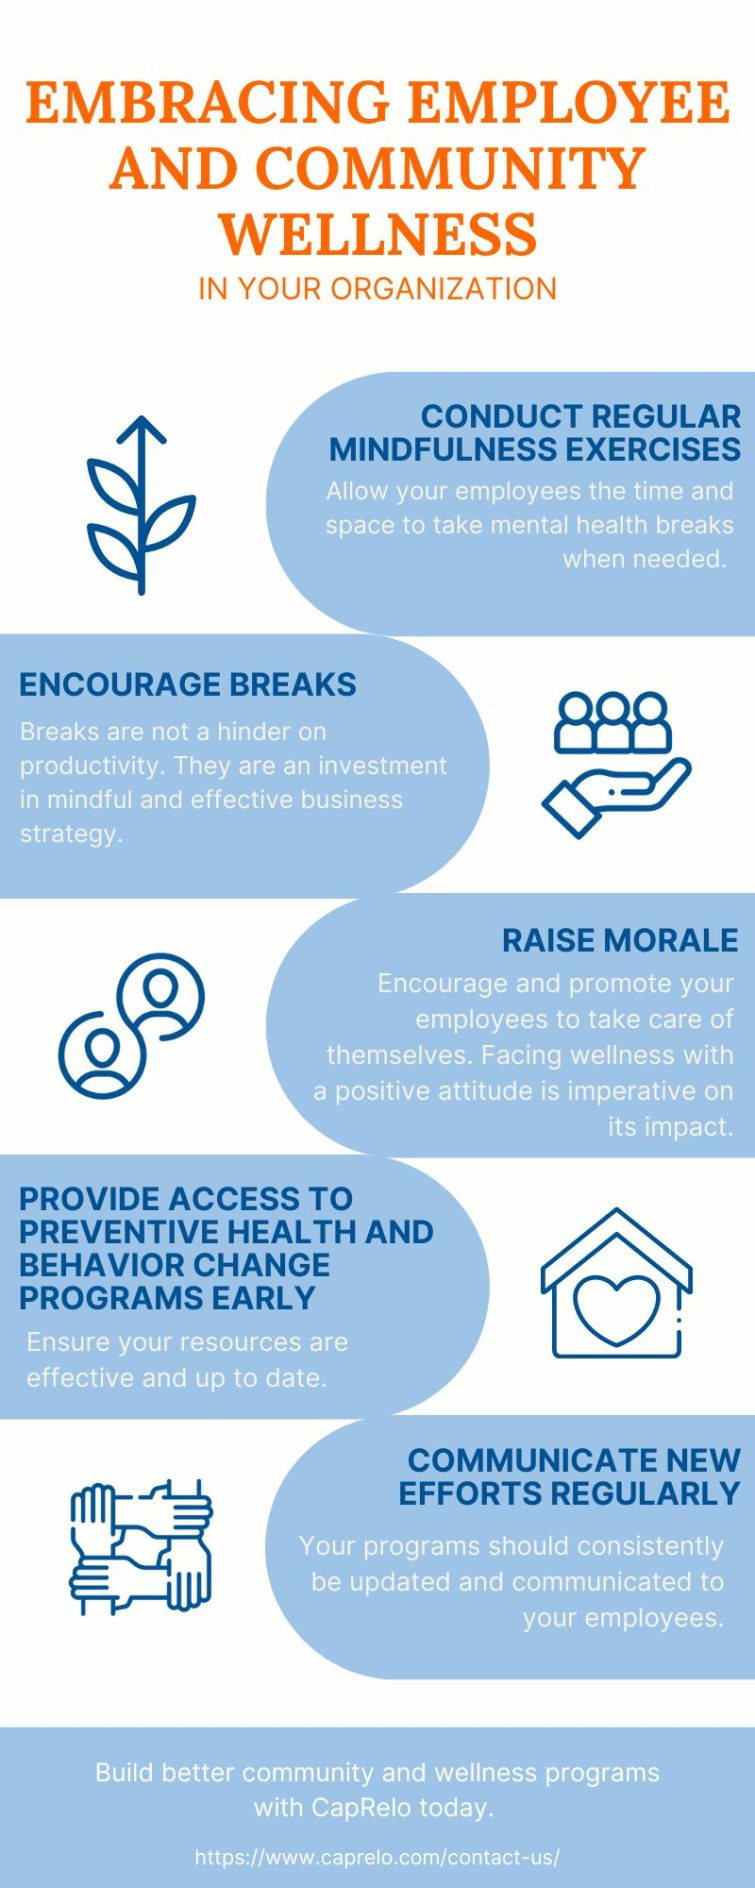 Embracing community and employee wellness graphic